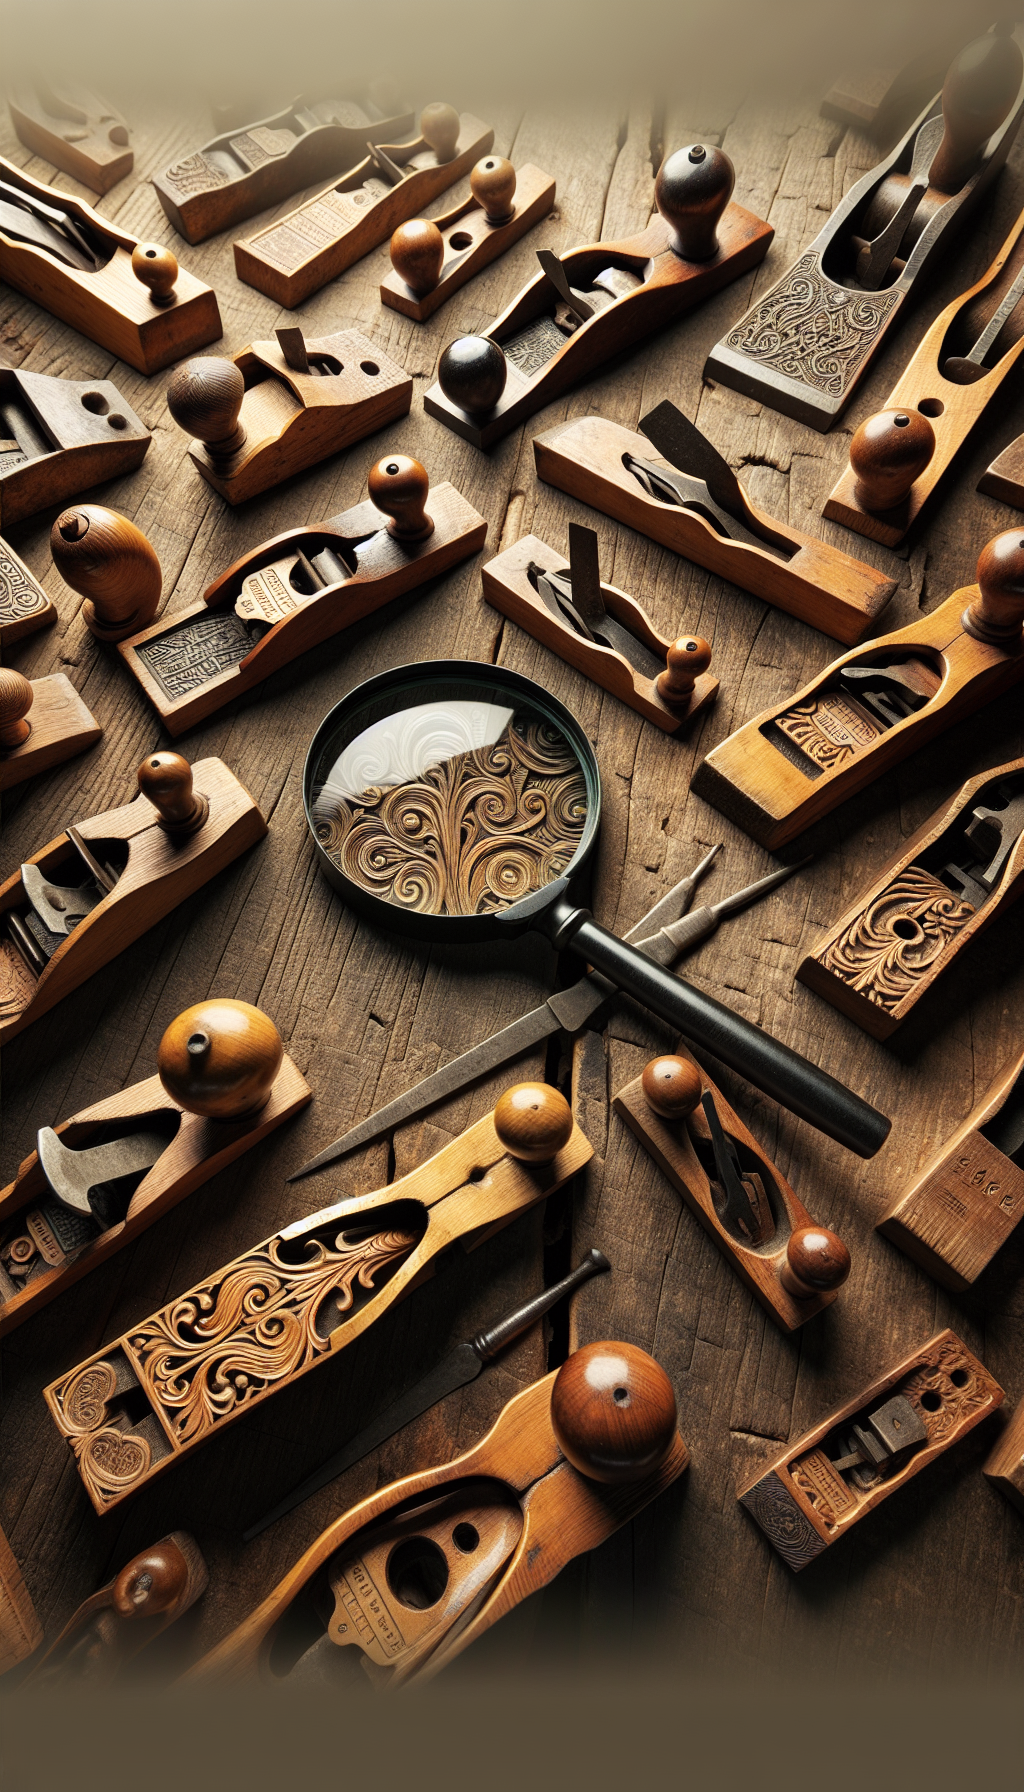 An array of intricately carved historical wood planes, each with distinct features highlighted by delicate lines and labels, rests on an antique workbench. At the center, a magnifying glass hovers over a particularly ornate specimen, revealing its unique maker's mark and type, symbolizing the identification process. The contrasting wood grains and textures of the planes celebrate the craftsmen's diverse legacies.